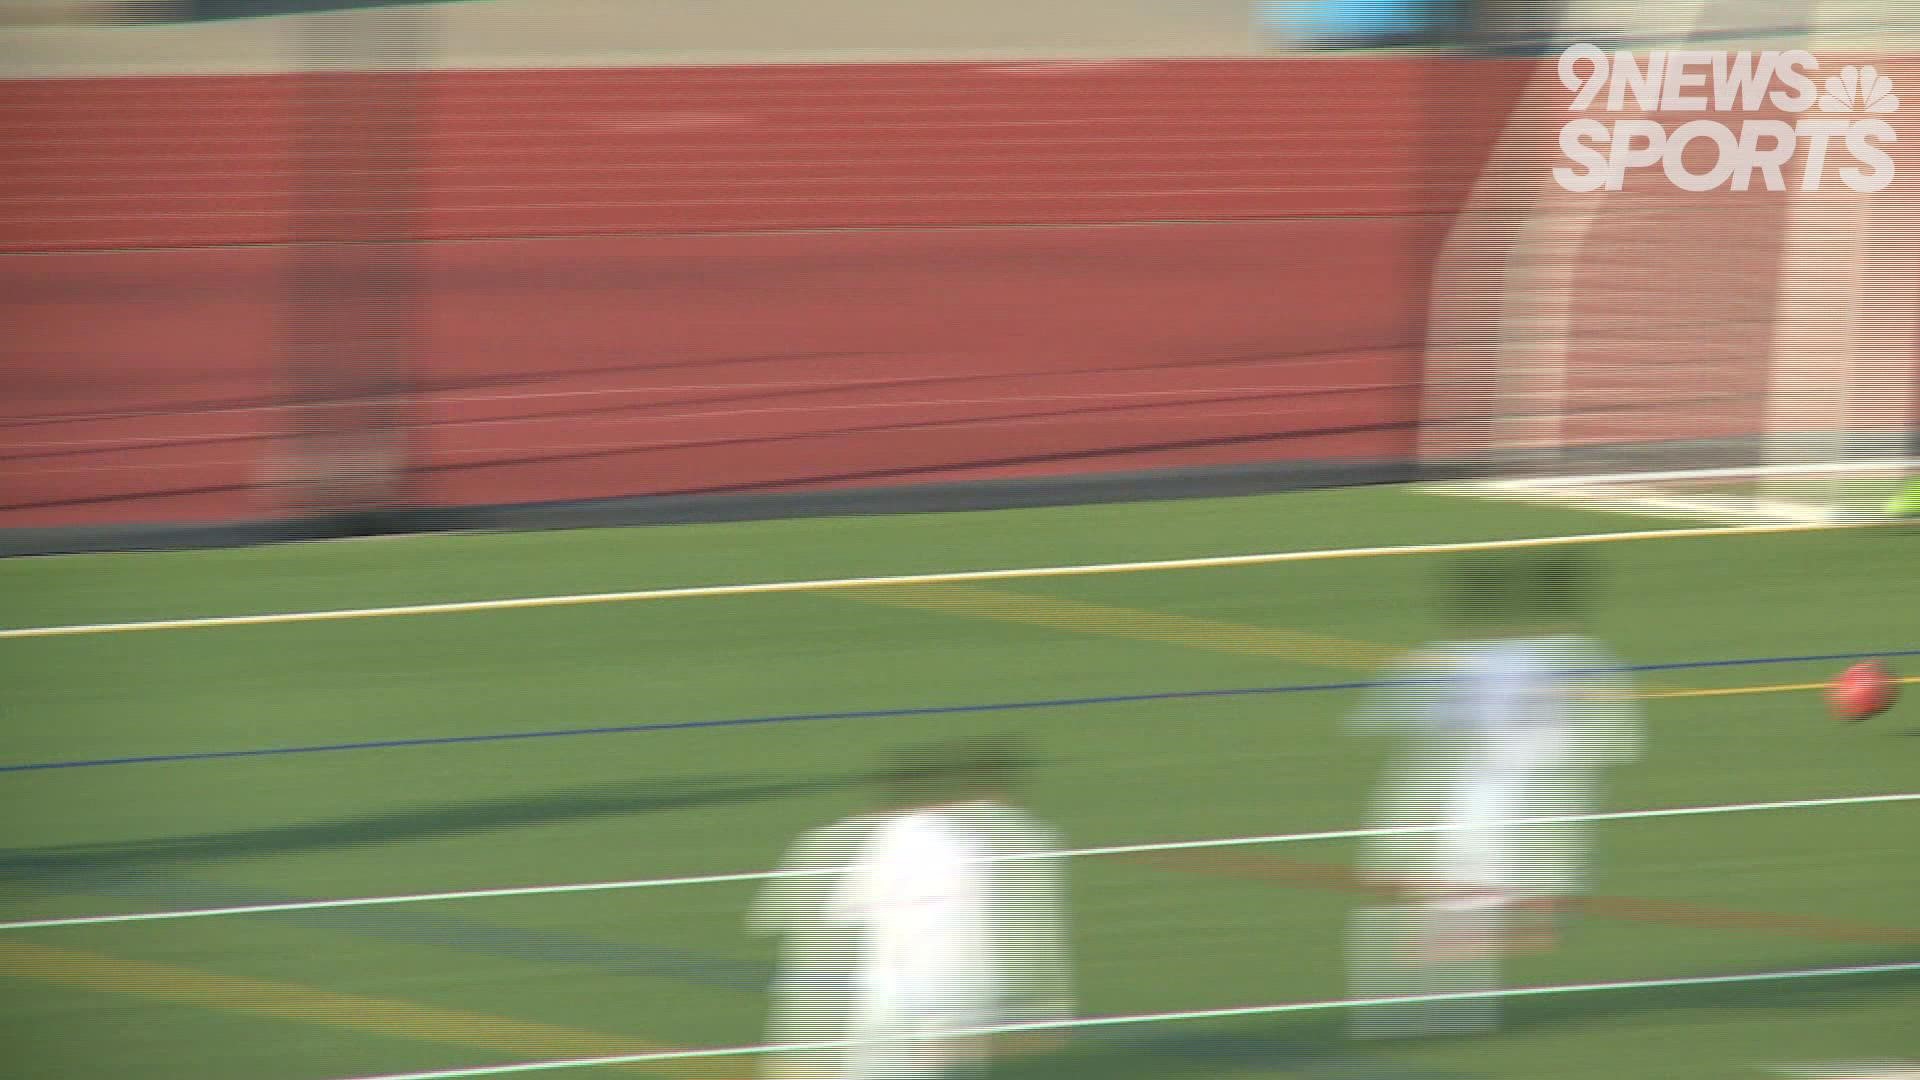 Nickell scored the game-winning goal as No. 1 Legacy boys soccer beat No. 2 Boulder last week.